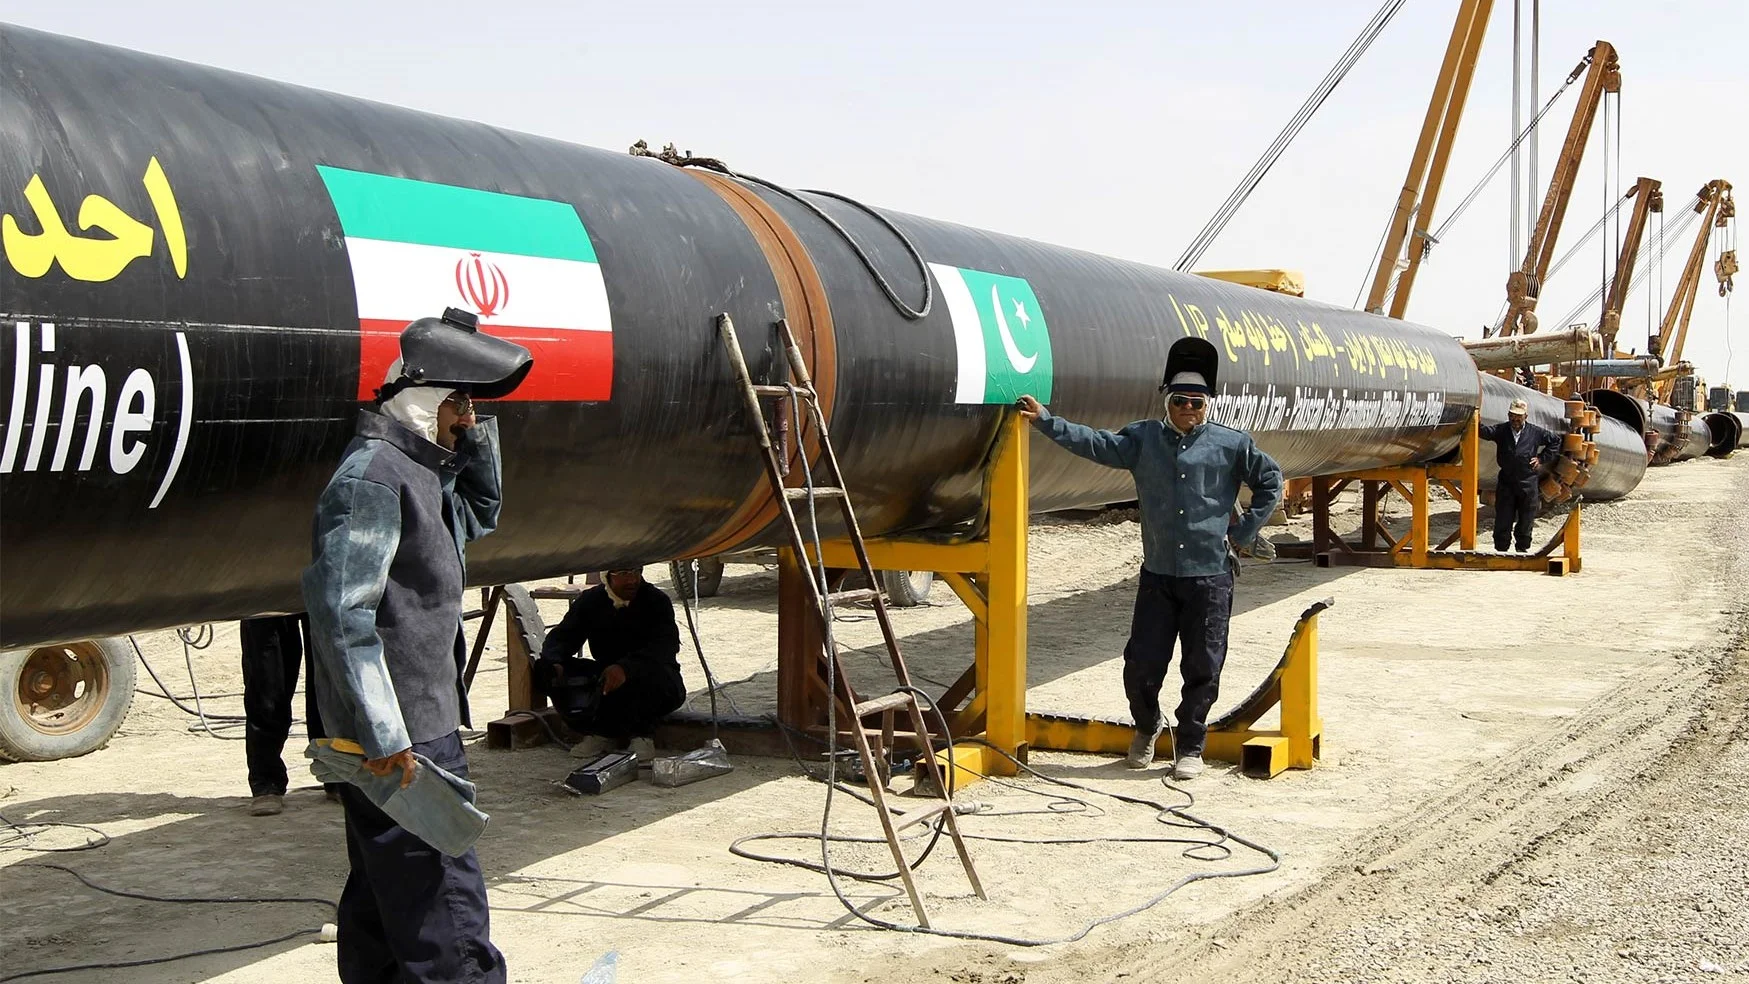 Pakistan faces $18 billion fine as Iran gas pipeline completion delayed, risking energy security